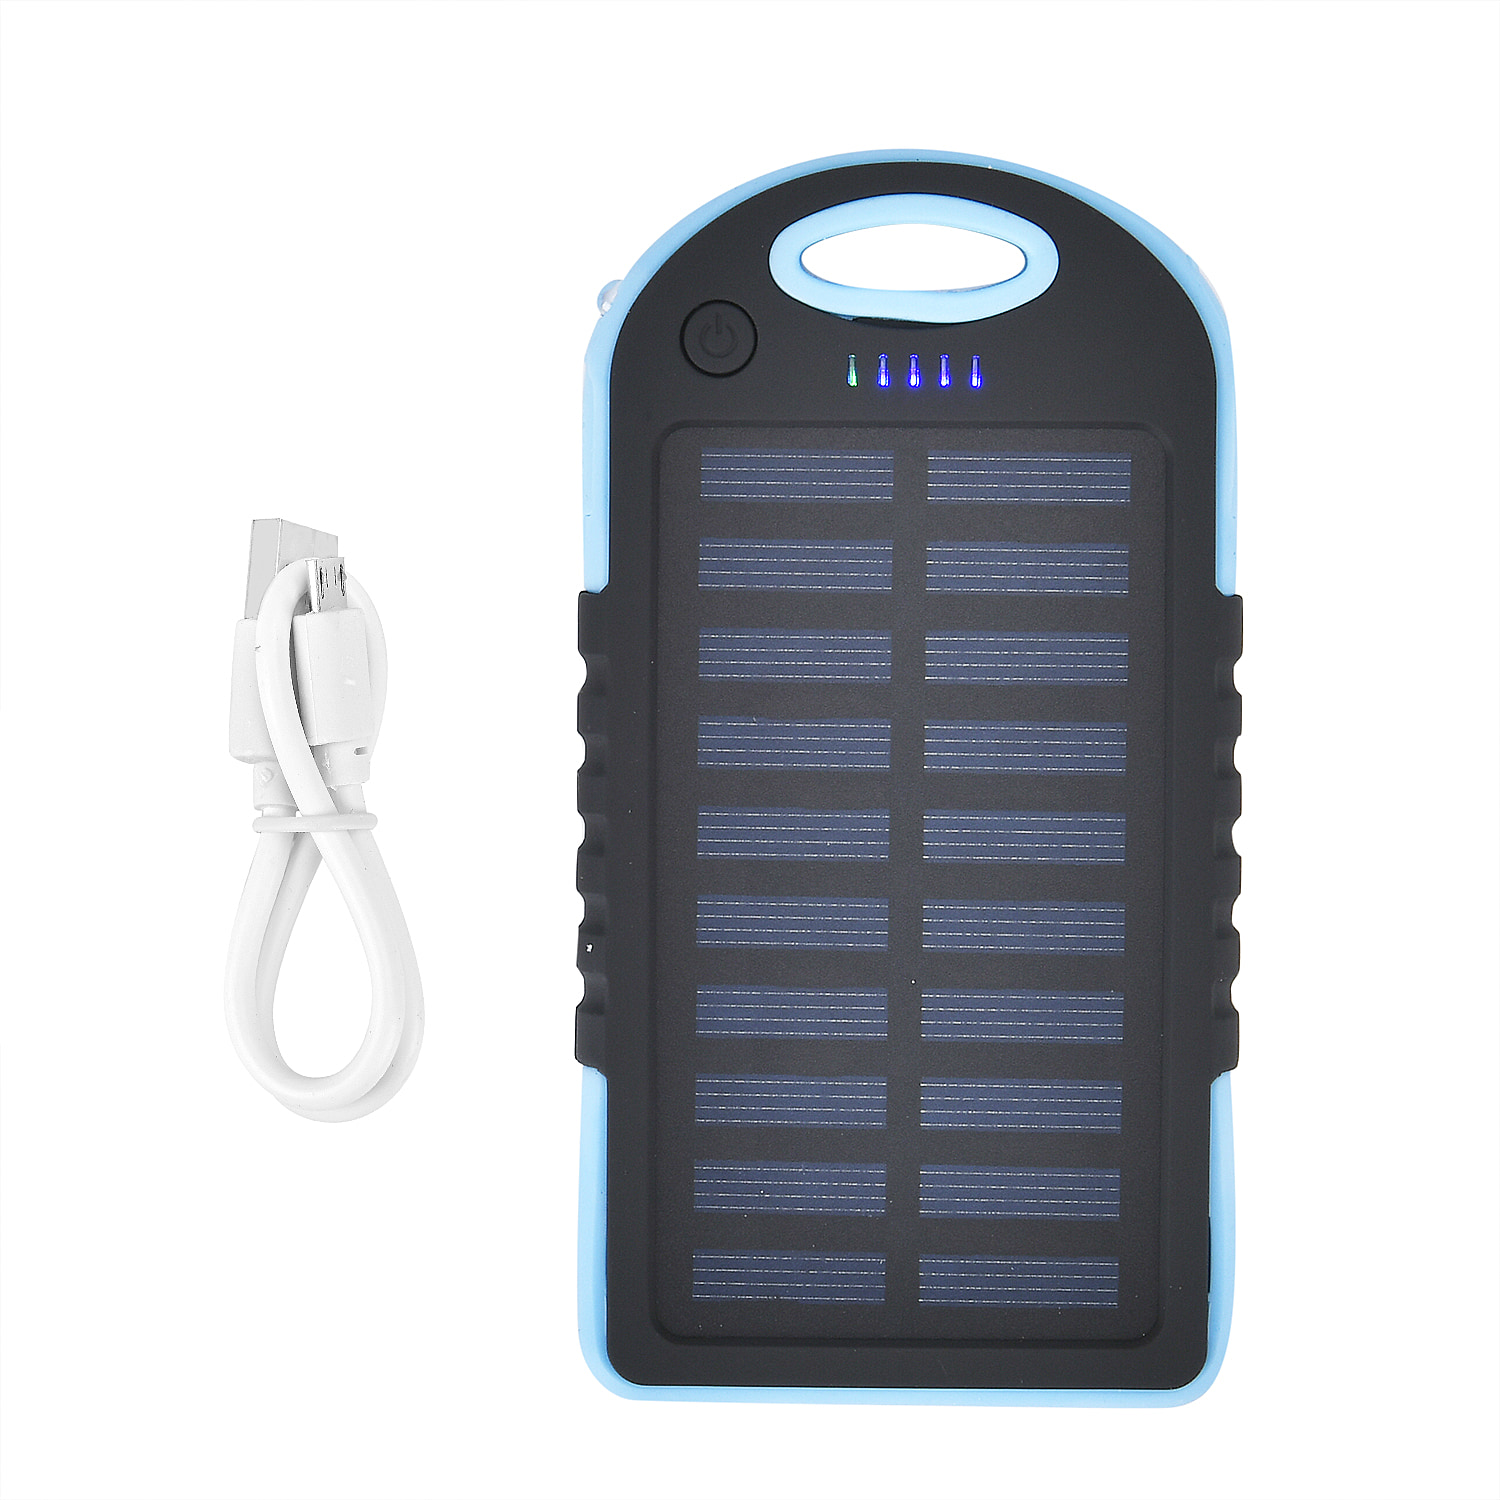 5000mAh Power Bank with Solar Panel, USB Cable (Change Android into Type C) - Blue & Black